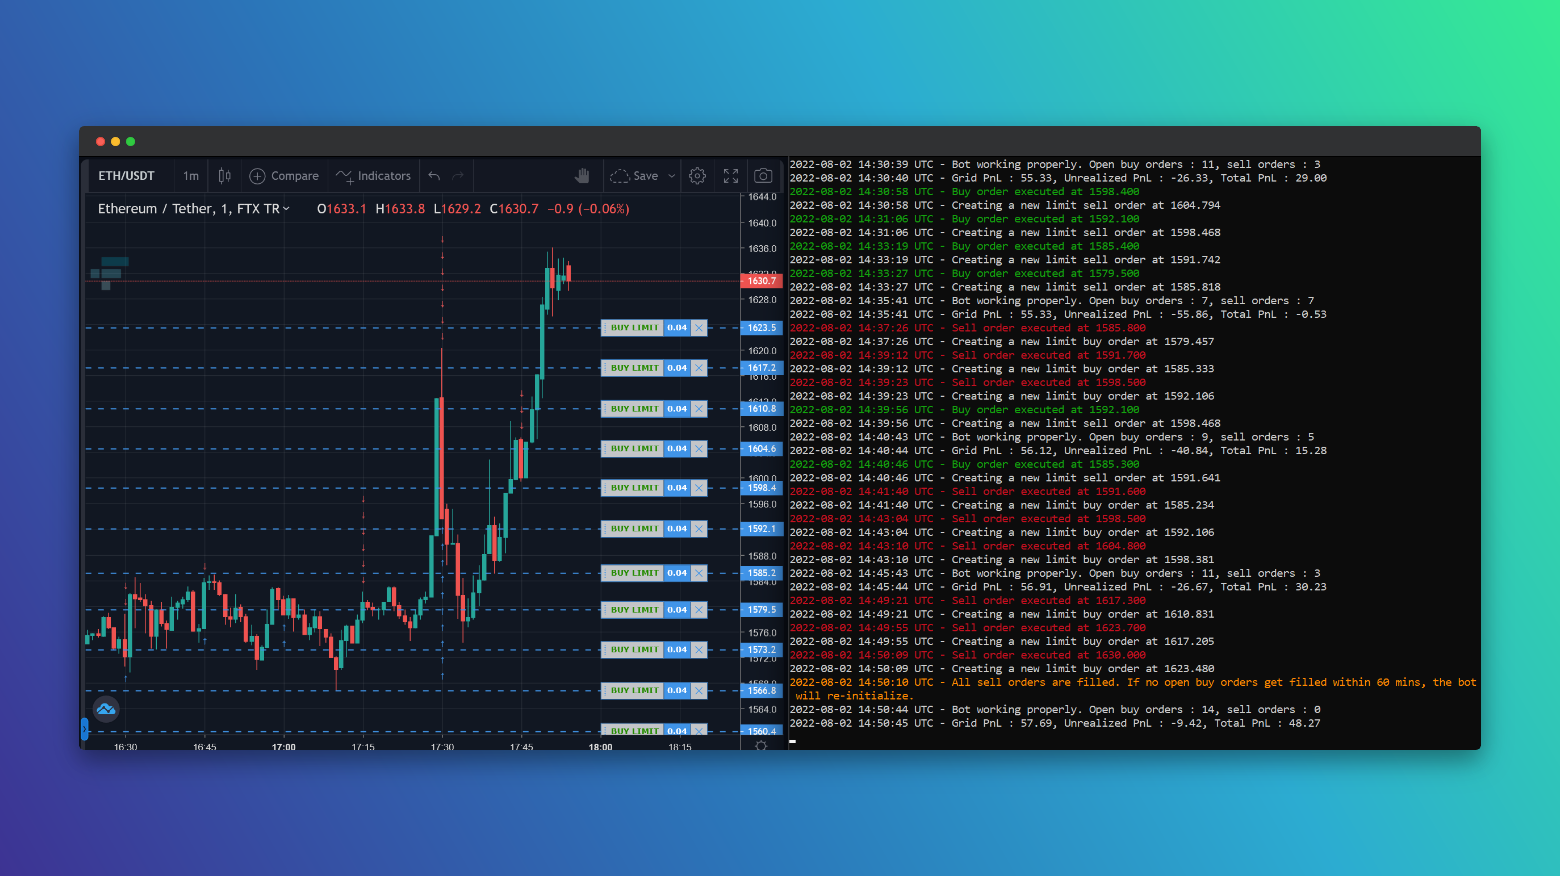 An algorithmic trading system that takes advantage of the volatility in the Cryptocurrency markets 24/7